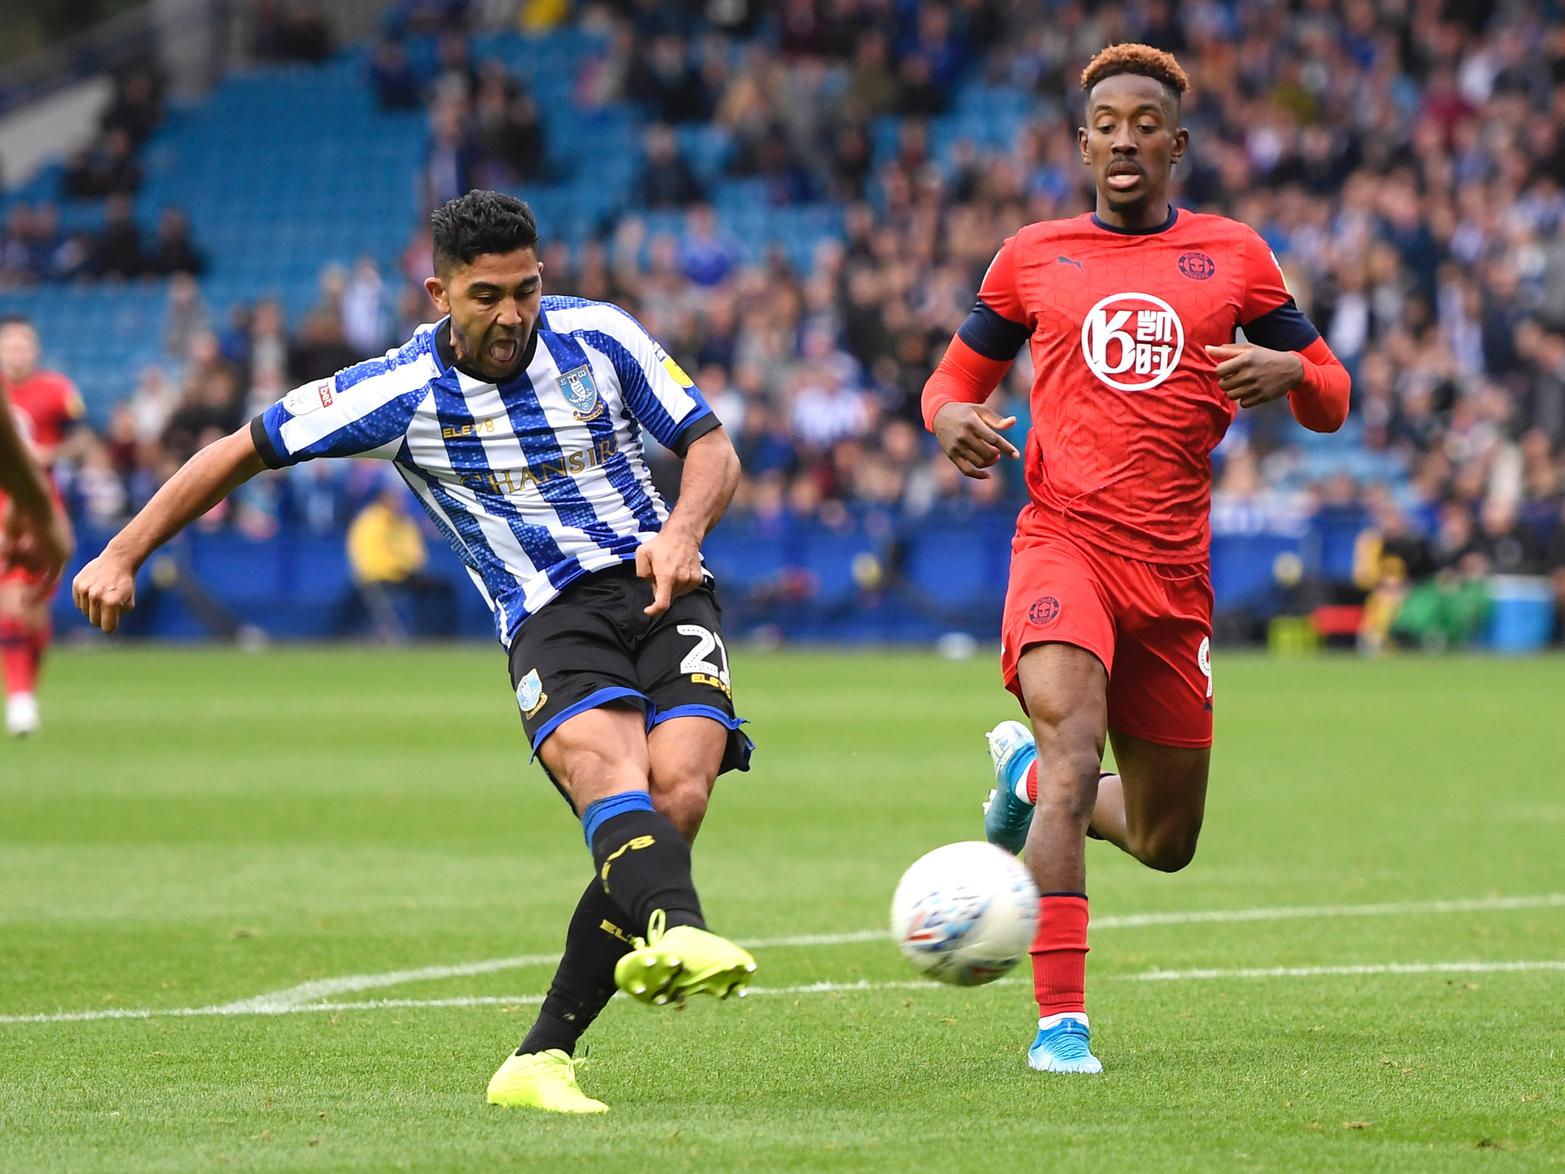 Sheffield Wednesday's Massimo Luongo has admitted that he's not played as much first team as he would have hoped this season, but has pledged to remain patient and take his chances when they arise. (Sheffield Star)